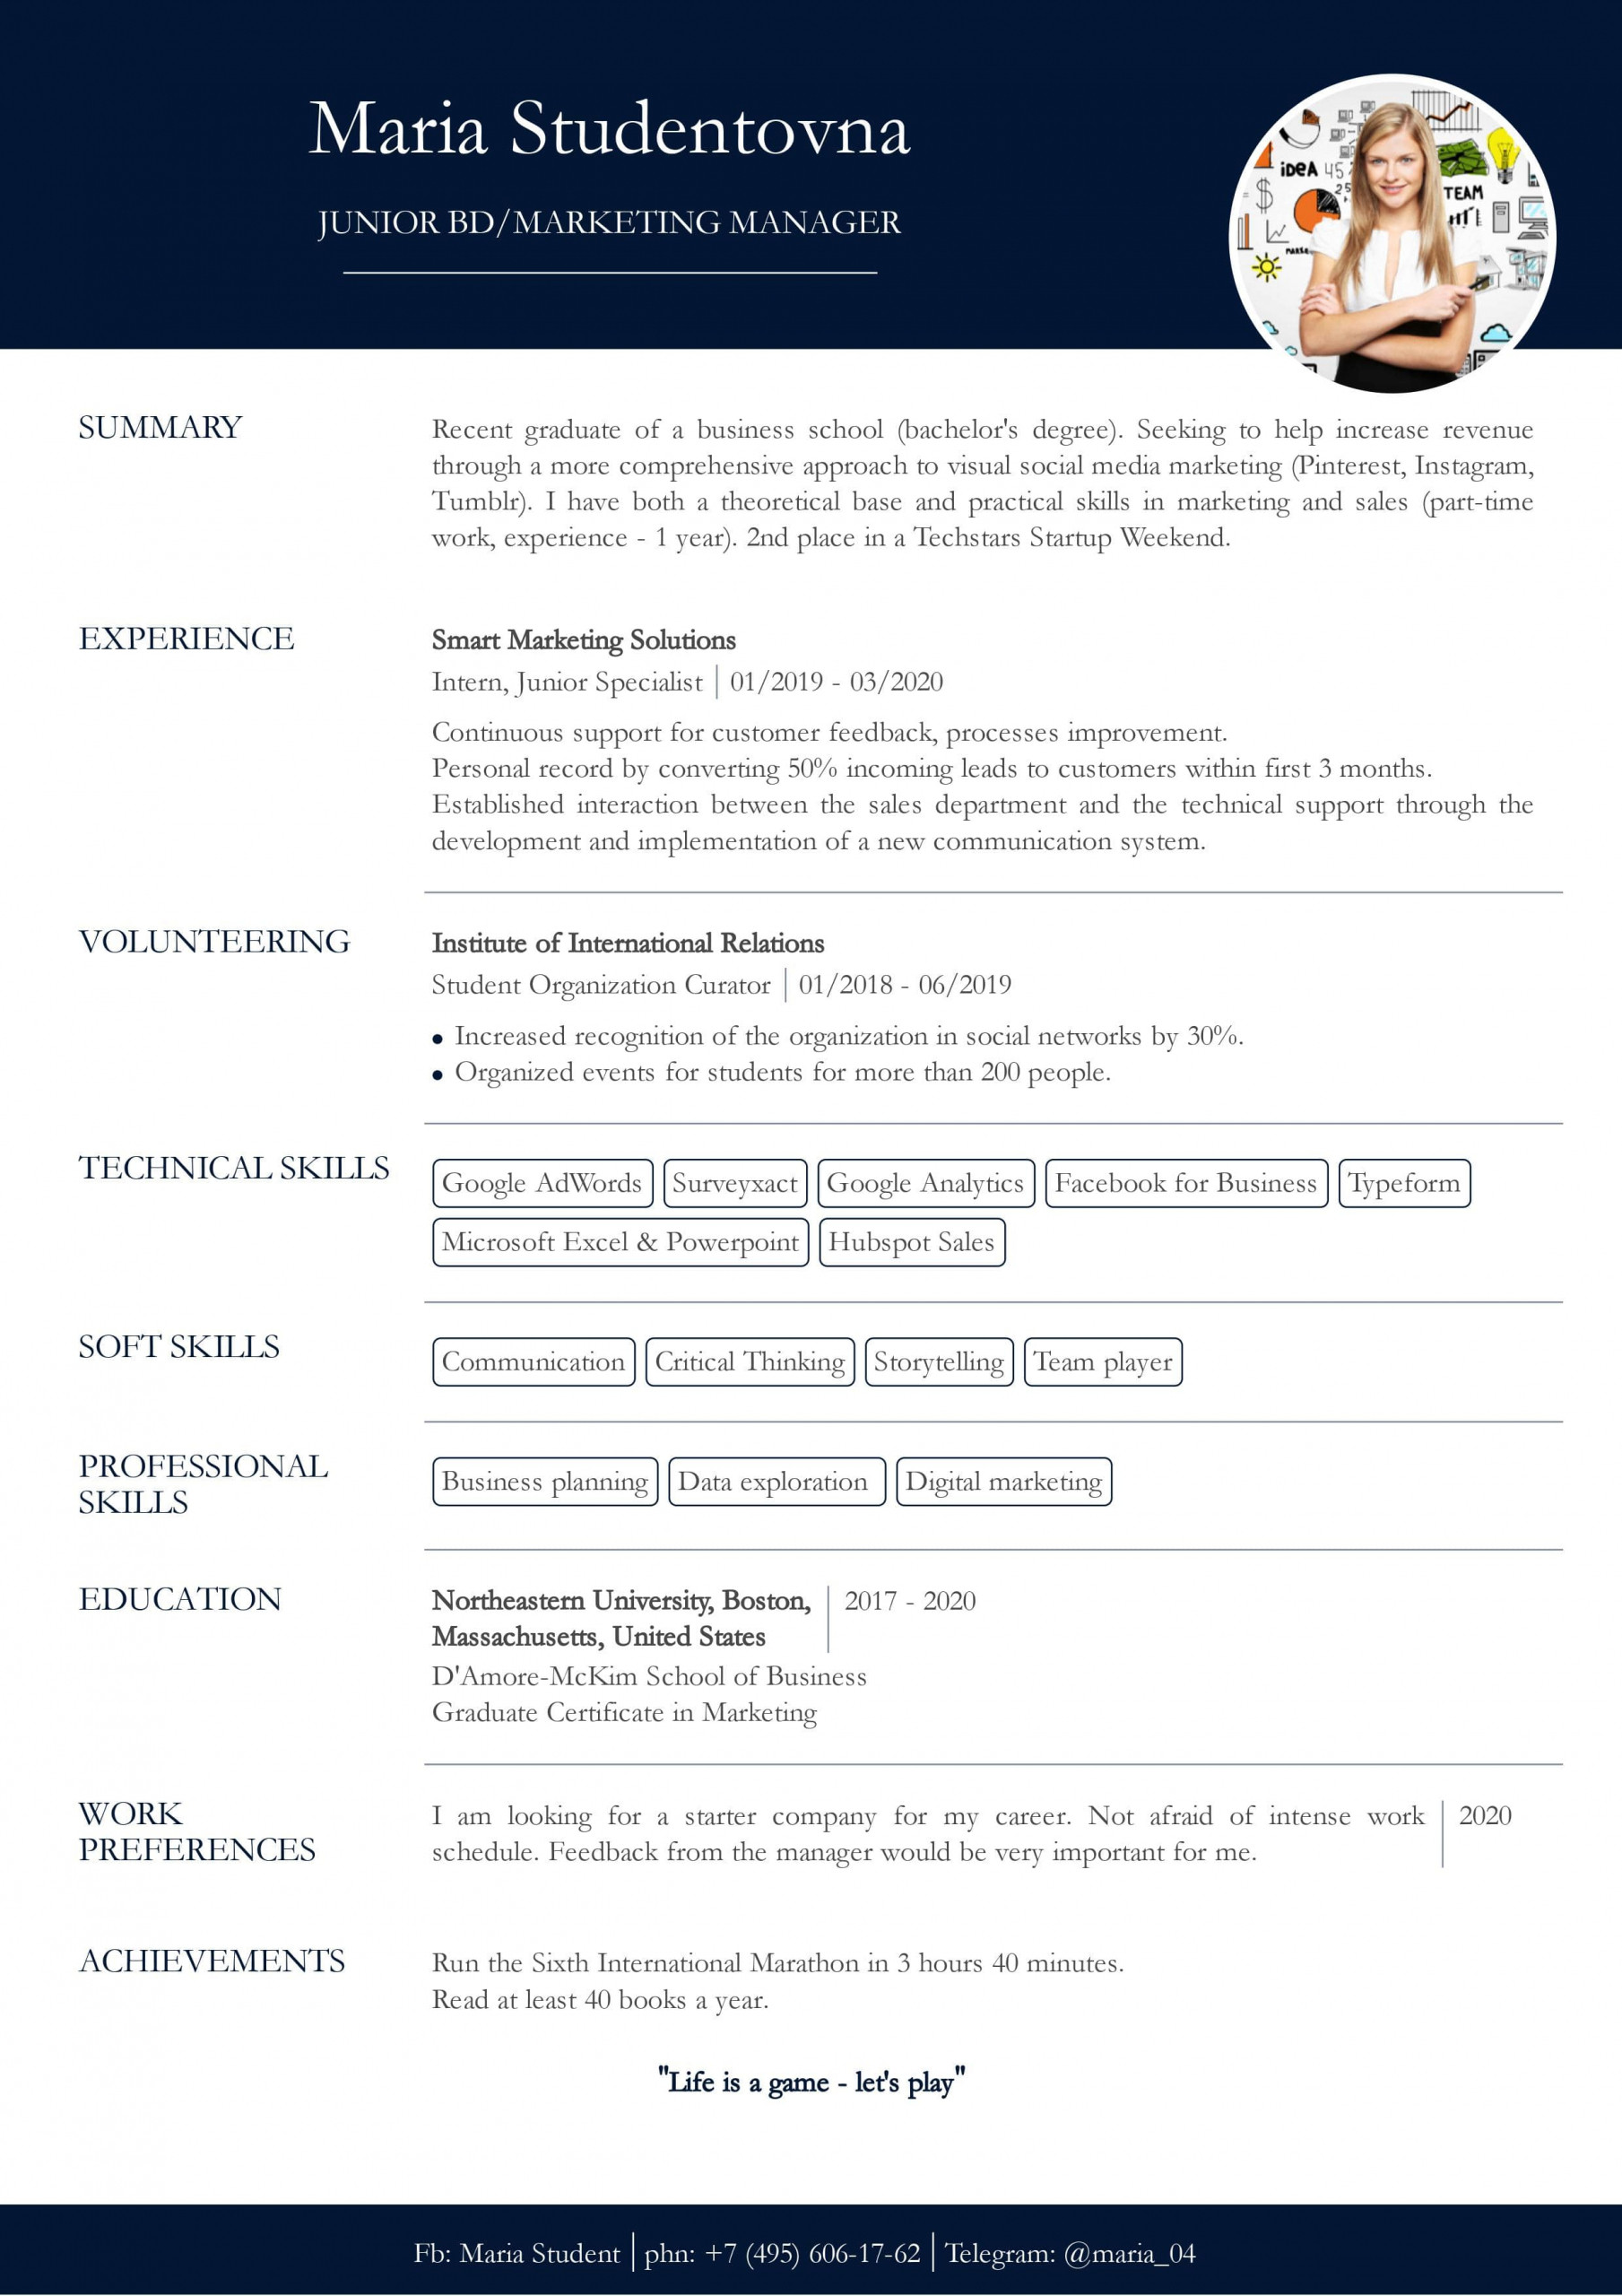 Resume for Undergraduate College Student Sample Resume with No Work Experience. Sample for Students. – Cv2you Blog